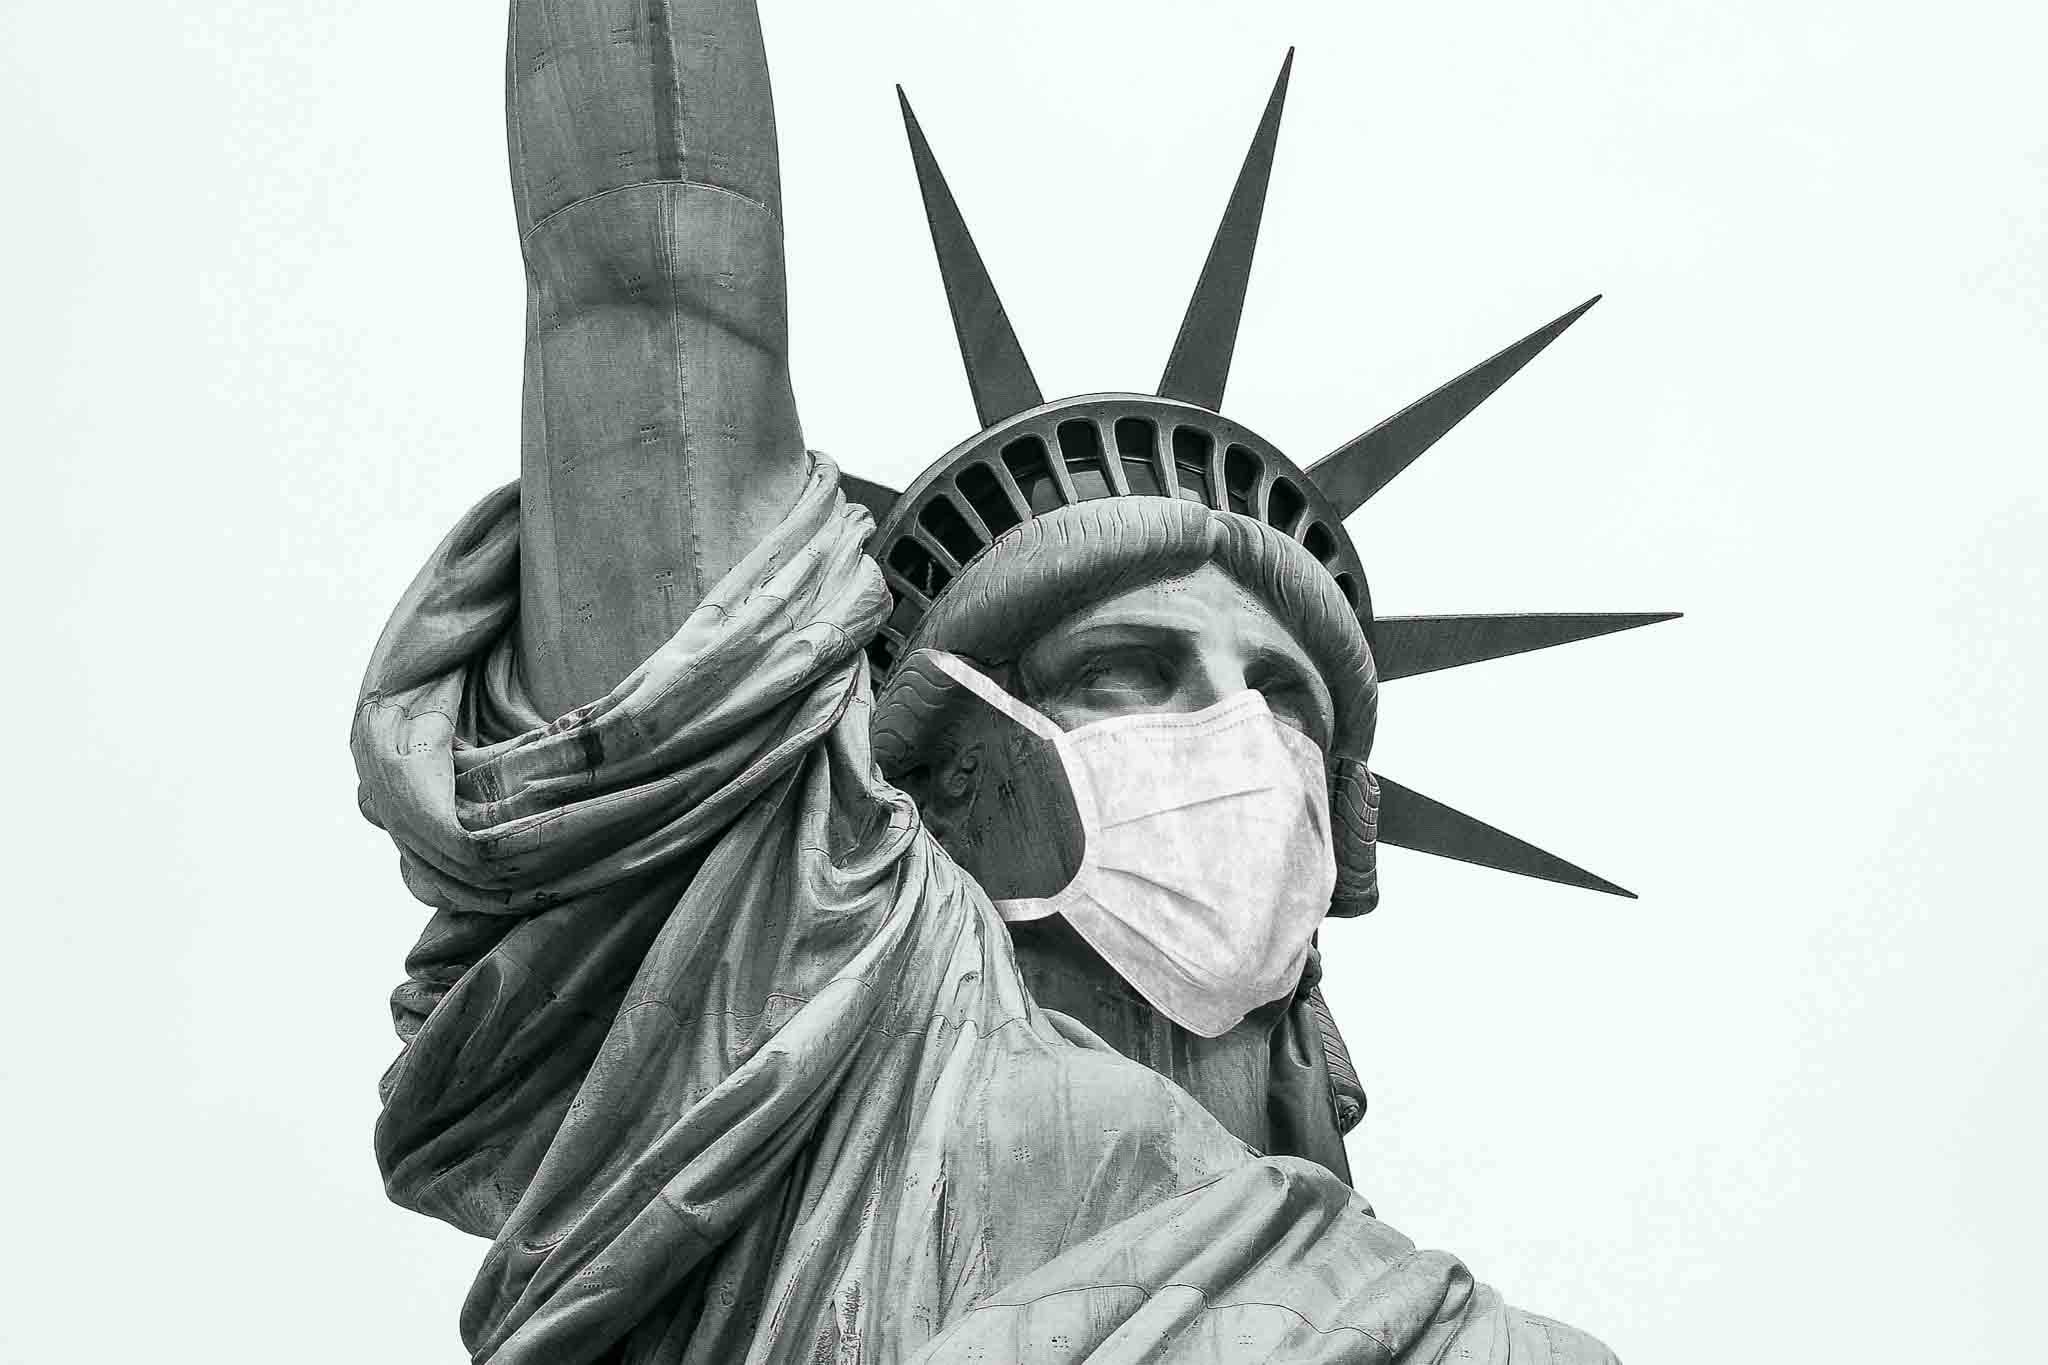 The Statue of Liberty with a mask on during Covid